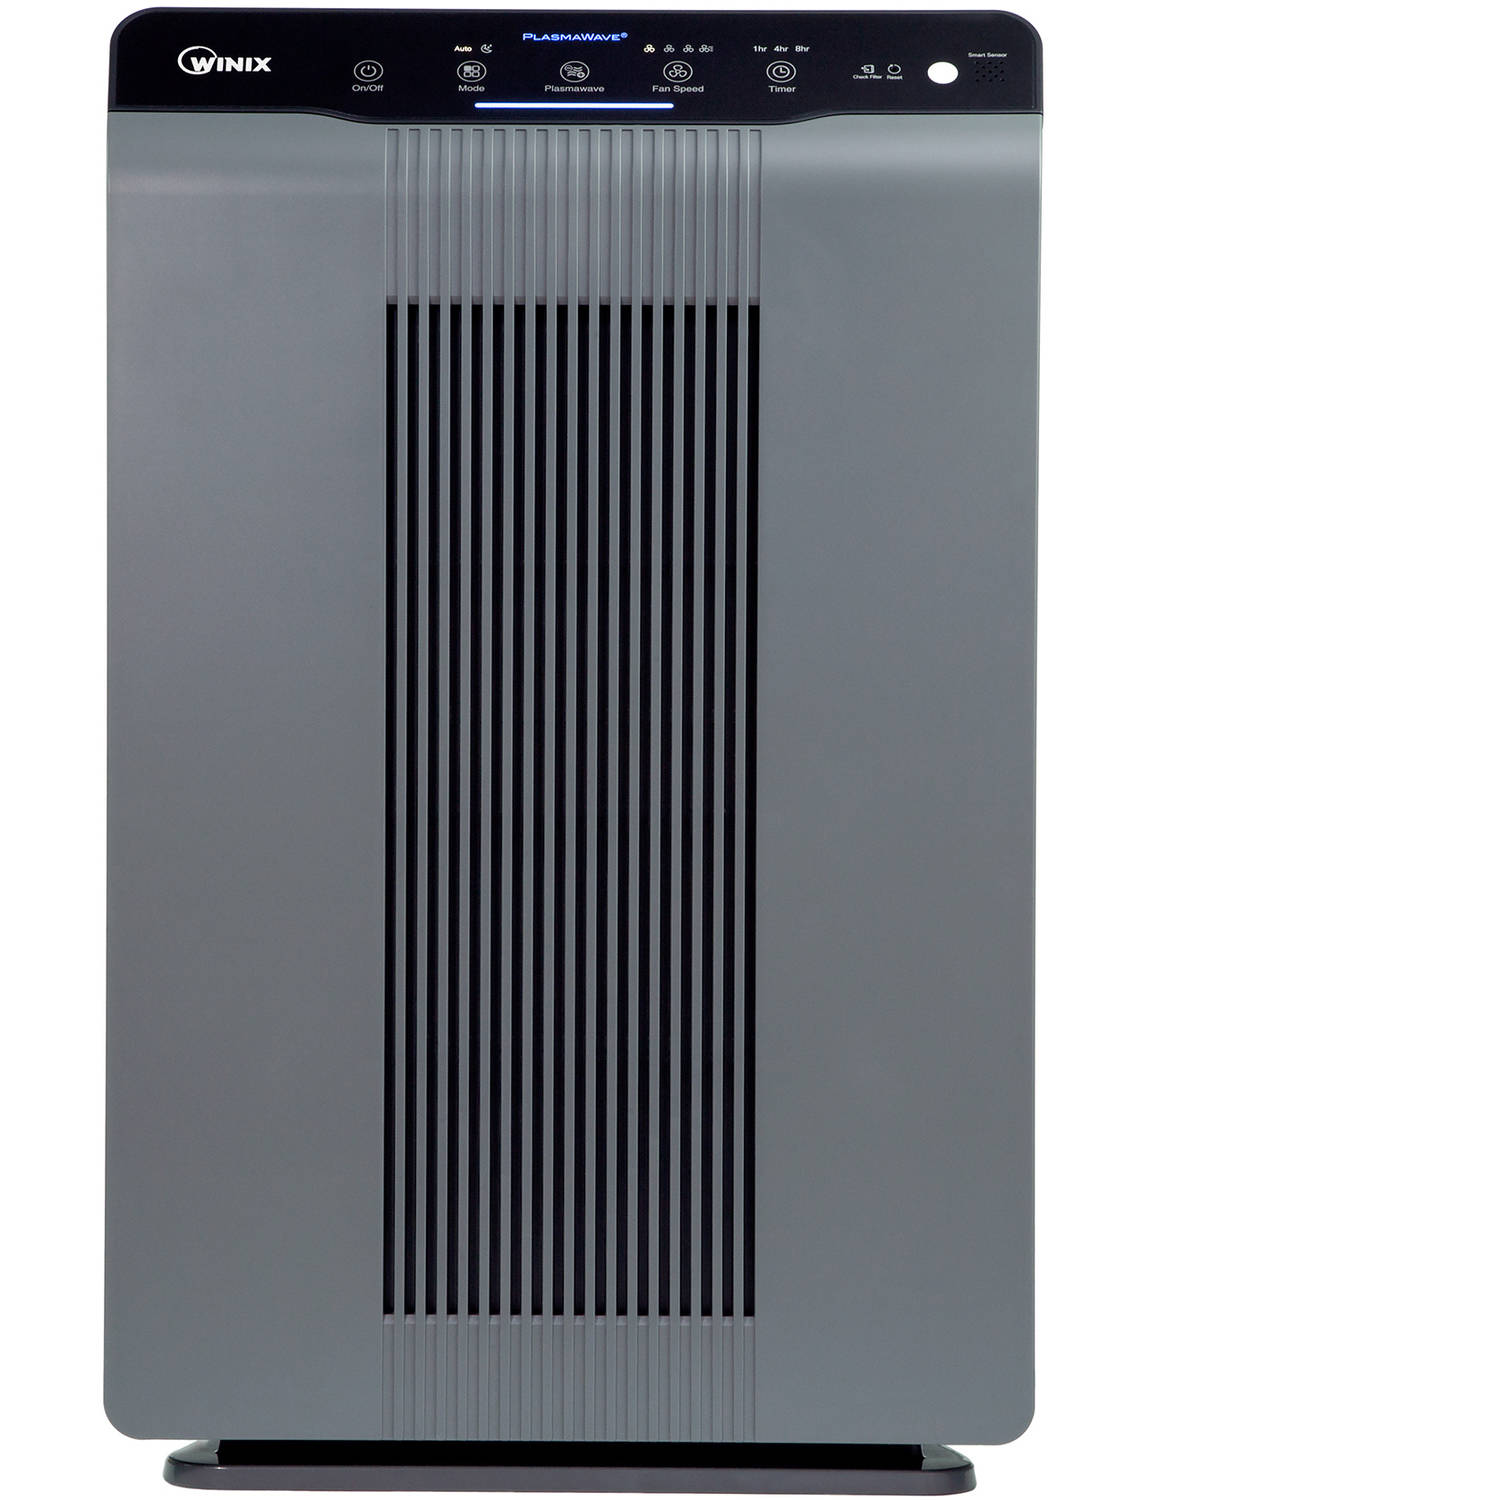 Winix 5300-2 True HEPA 4-Stage Air Purifier with PlasmaWave Technology, AHAM Verified for 5 air changes per hour for 360 square feet - image 3 of 9